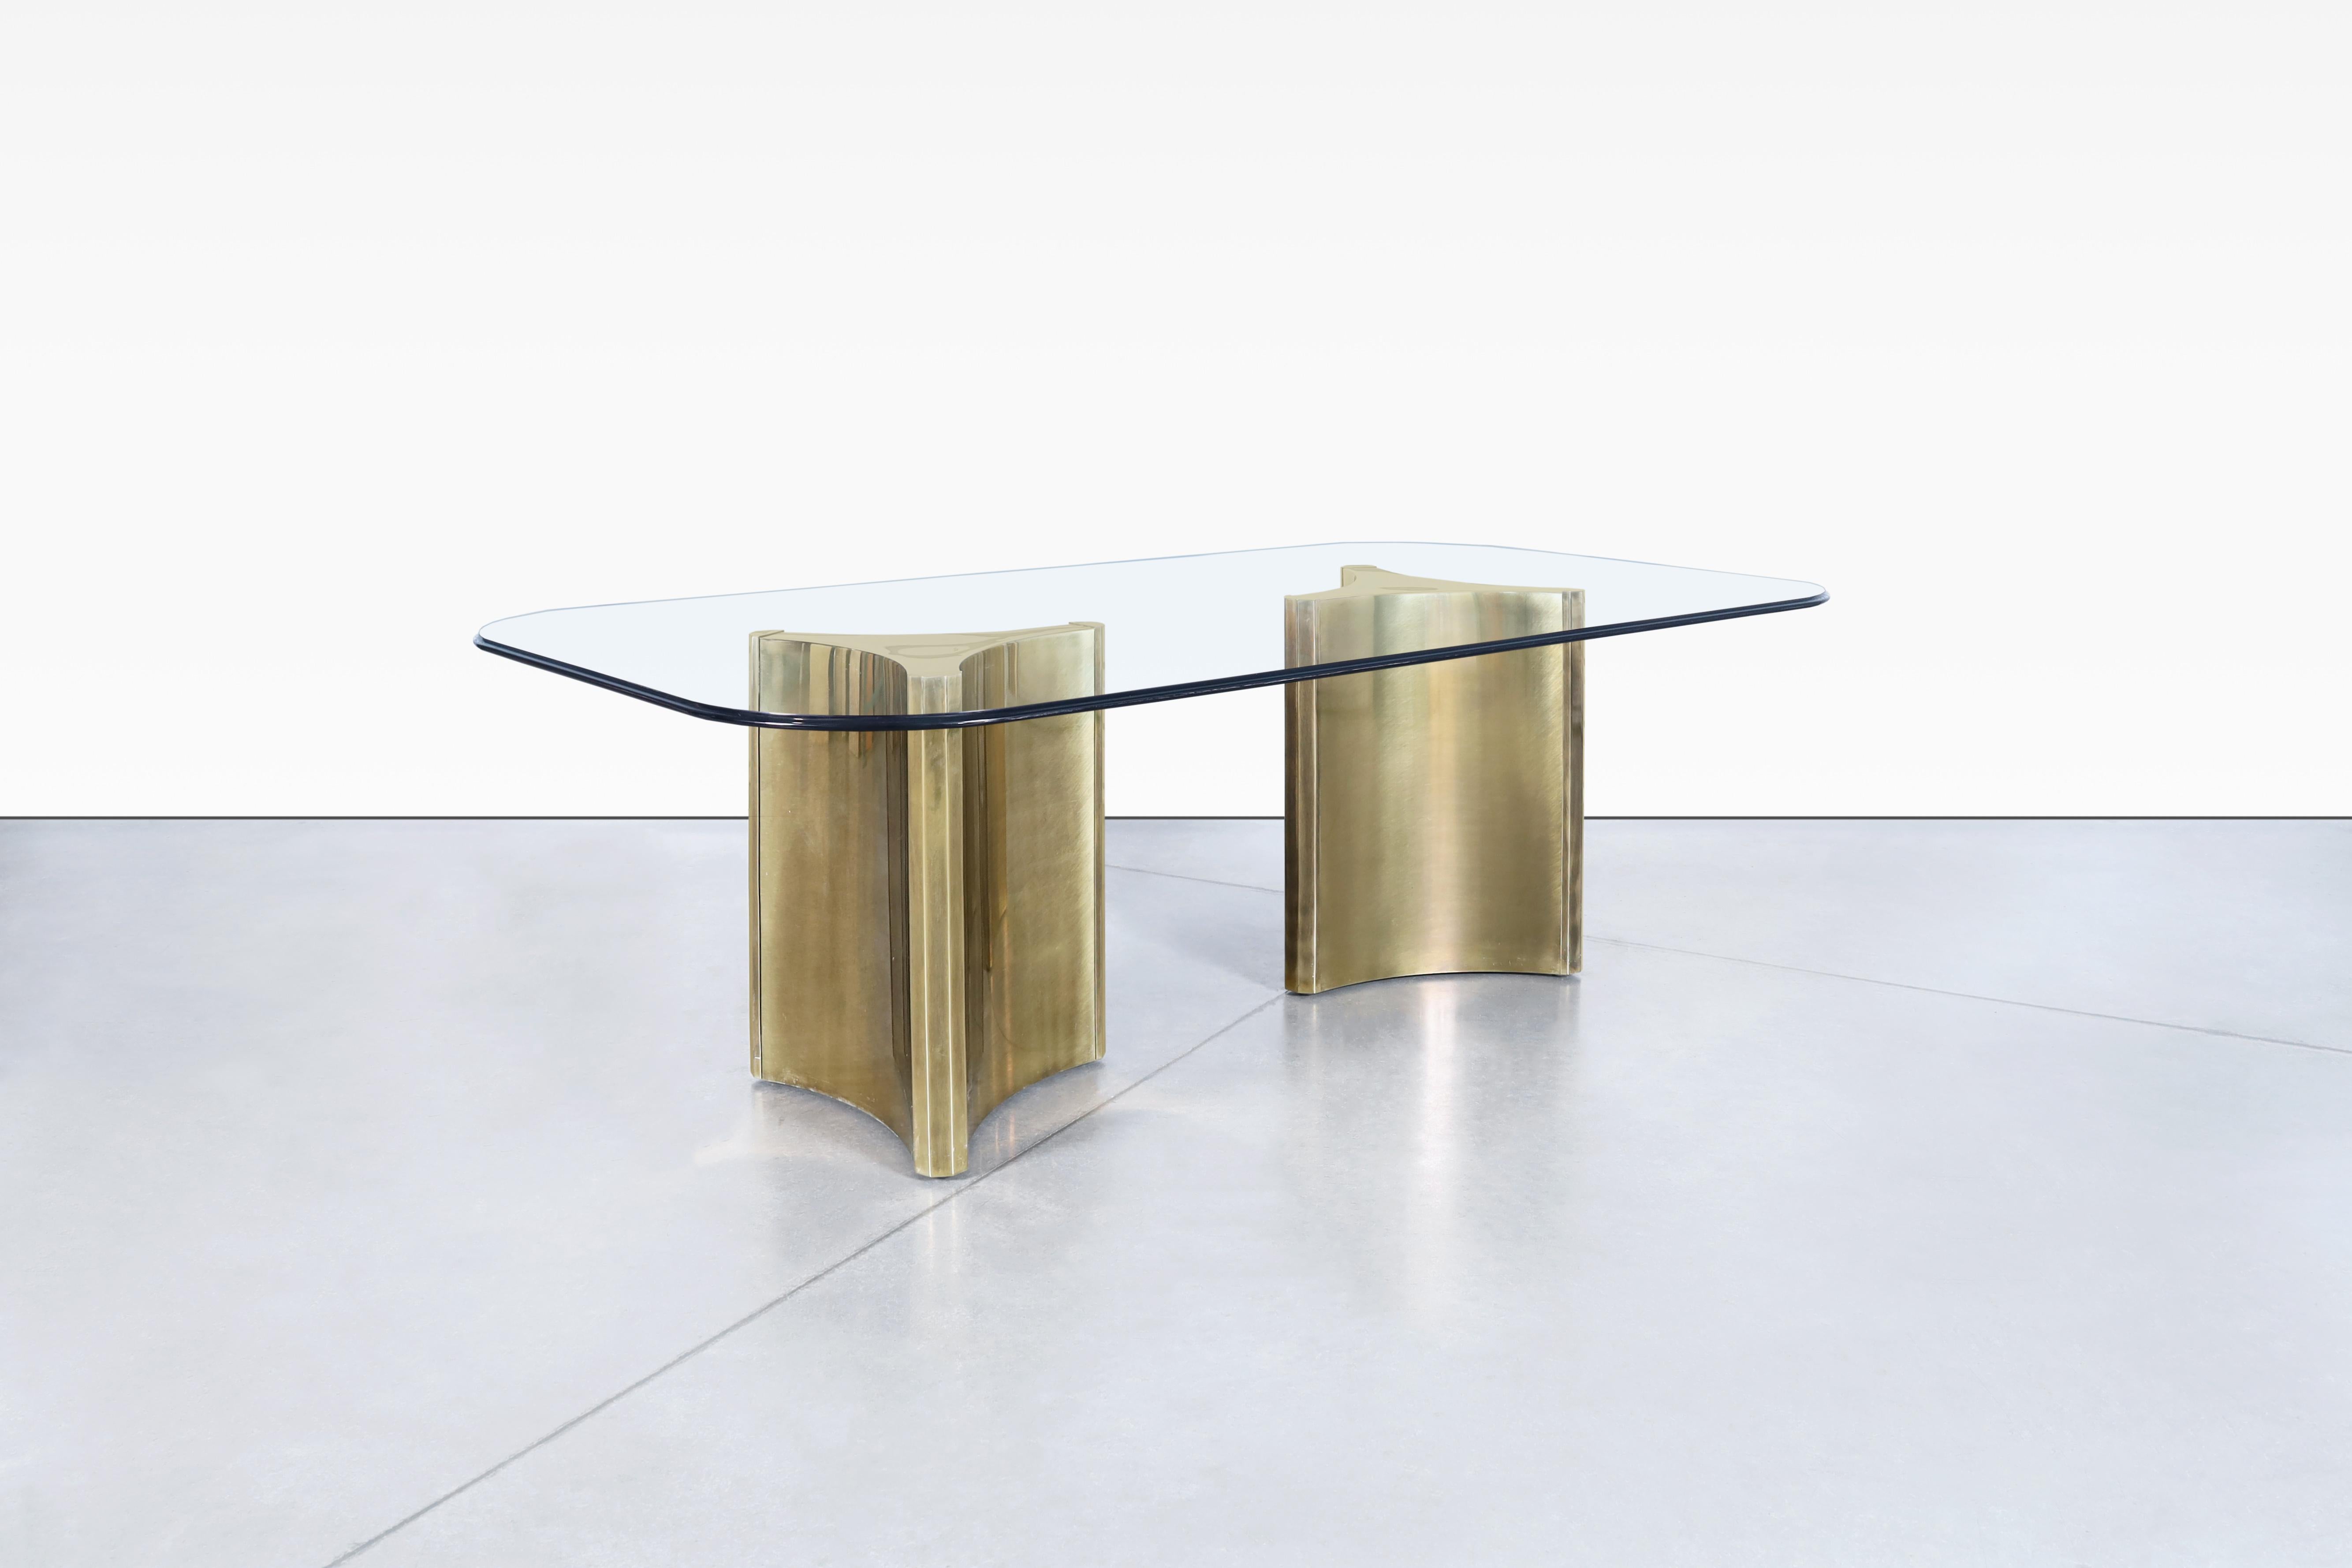 Stunning vintage brass “Trilobi” dining table designed and manufactured by Mastercraft, circa 1970s. Looking for a unique and versatile piece of furniture that will elevate your décor? Look no further than these stunning brass table! From a